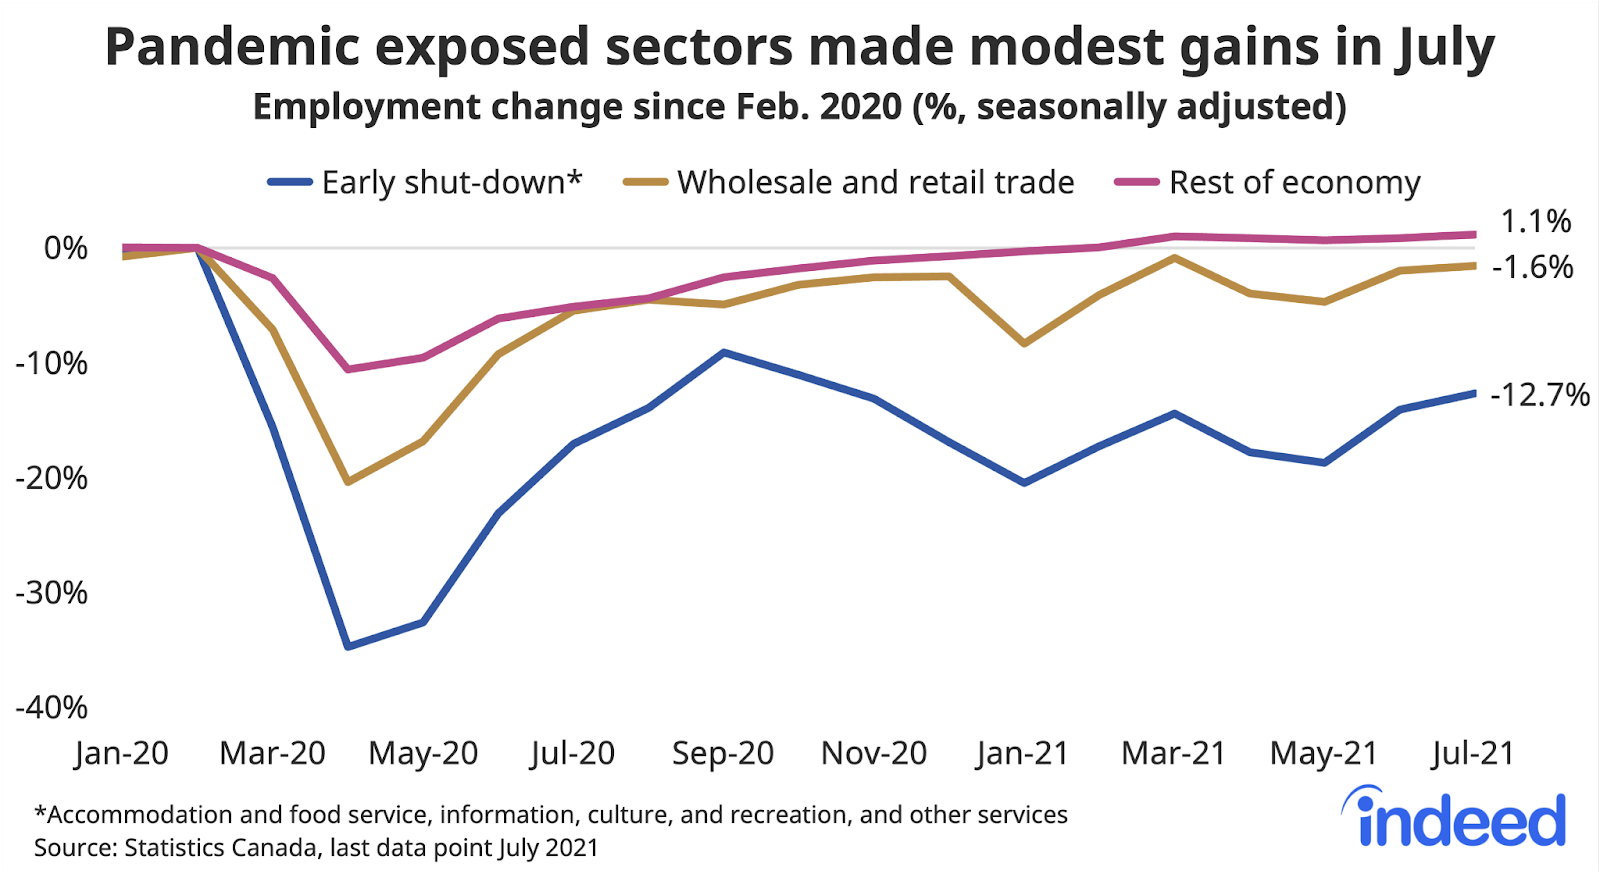 Line graph titled “Pandemic exposed sectors made modest gains in July.” With a vertical axis ranging from -40% to 0%, Indeed tracked the employment change along a horizontal axis ranging from January 2020 to July 2021 with lines representing “early shut-down,” “wholesale and retail trade,” and “rest of economy.” As of July 2021, early shut-down employment in accommodation and food service was at -12.7%. 